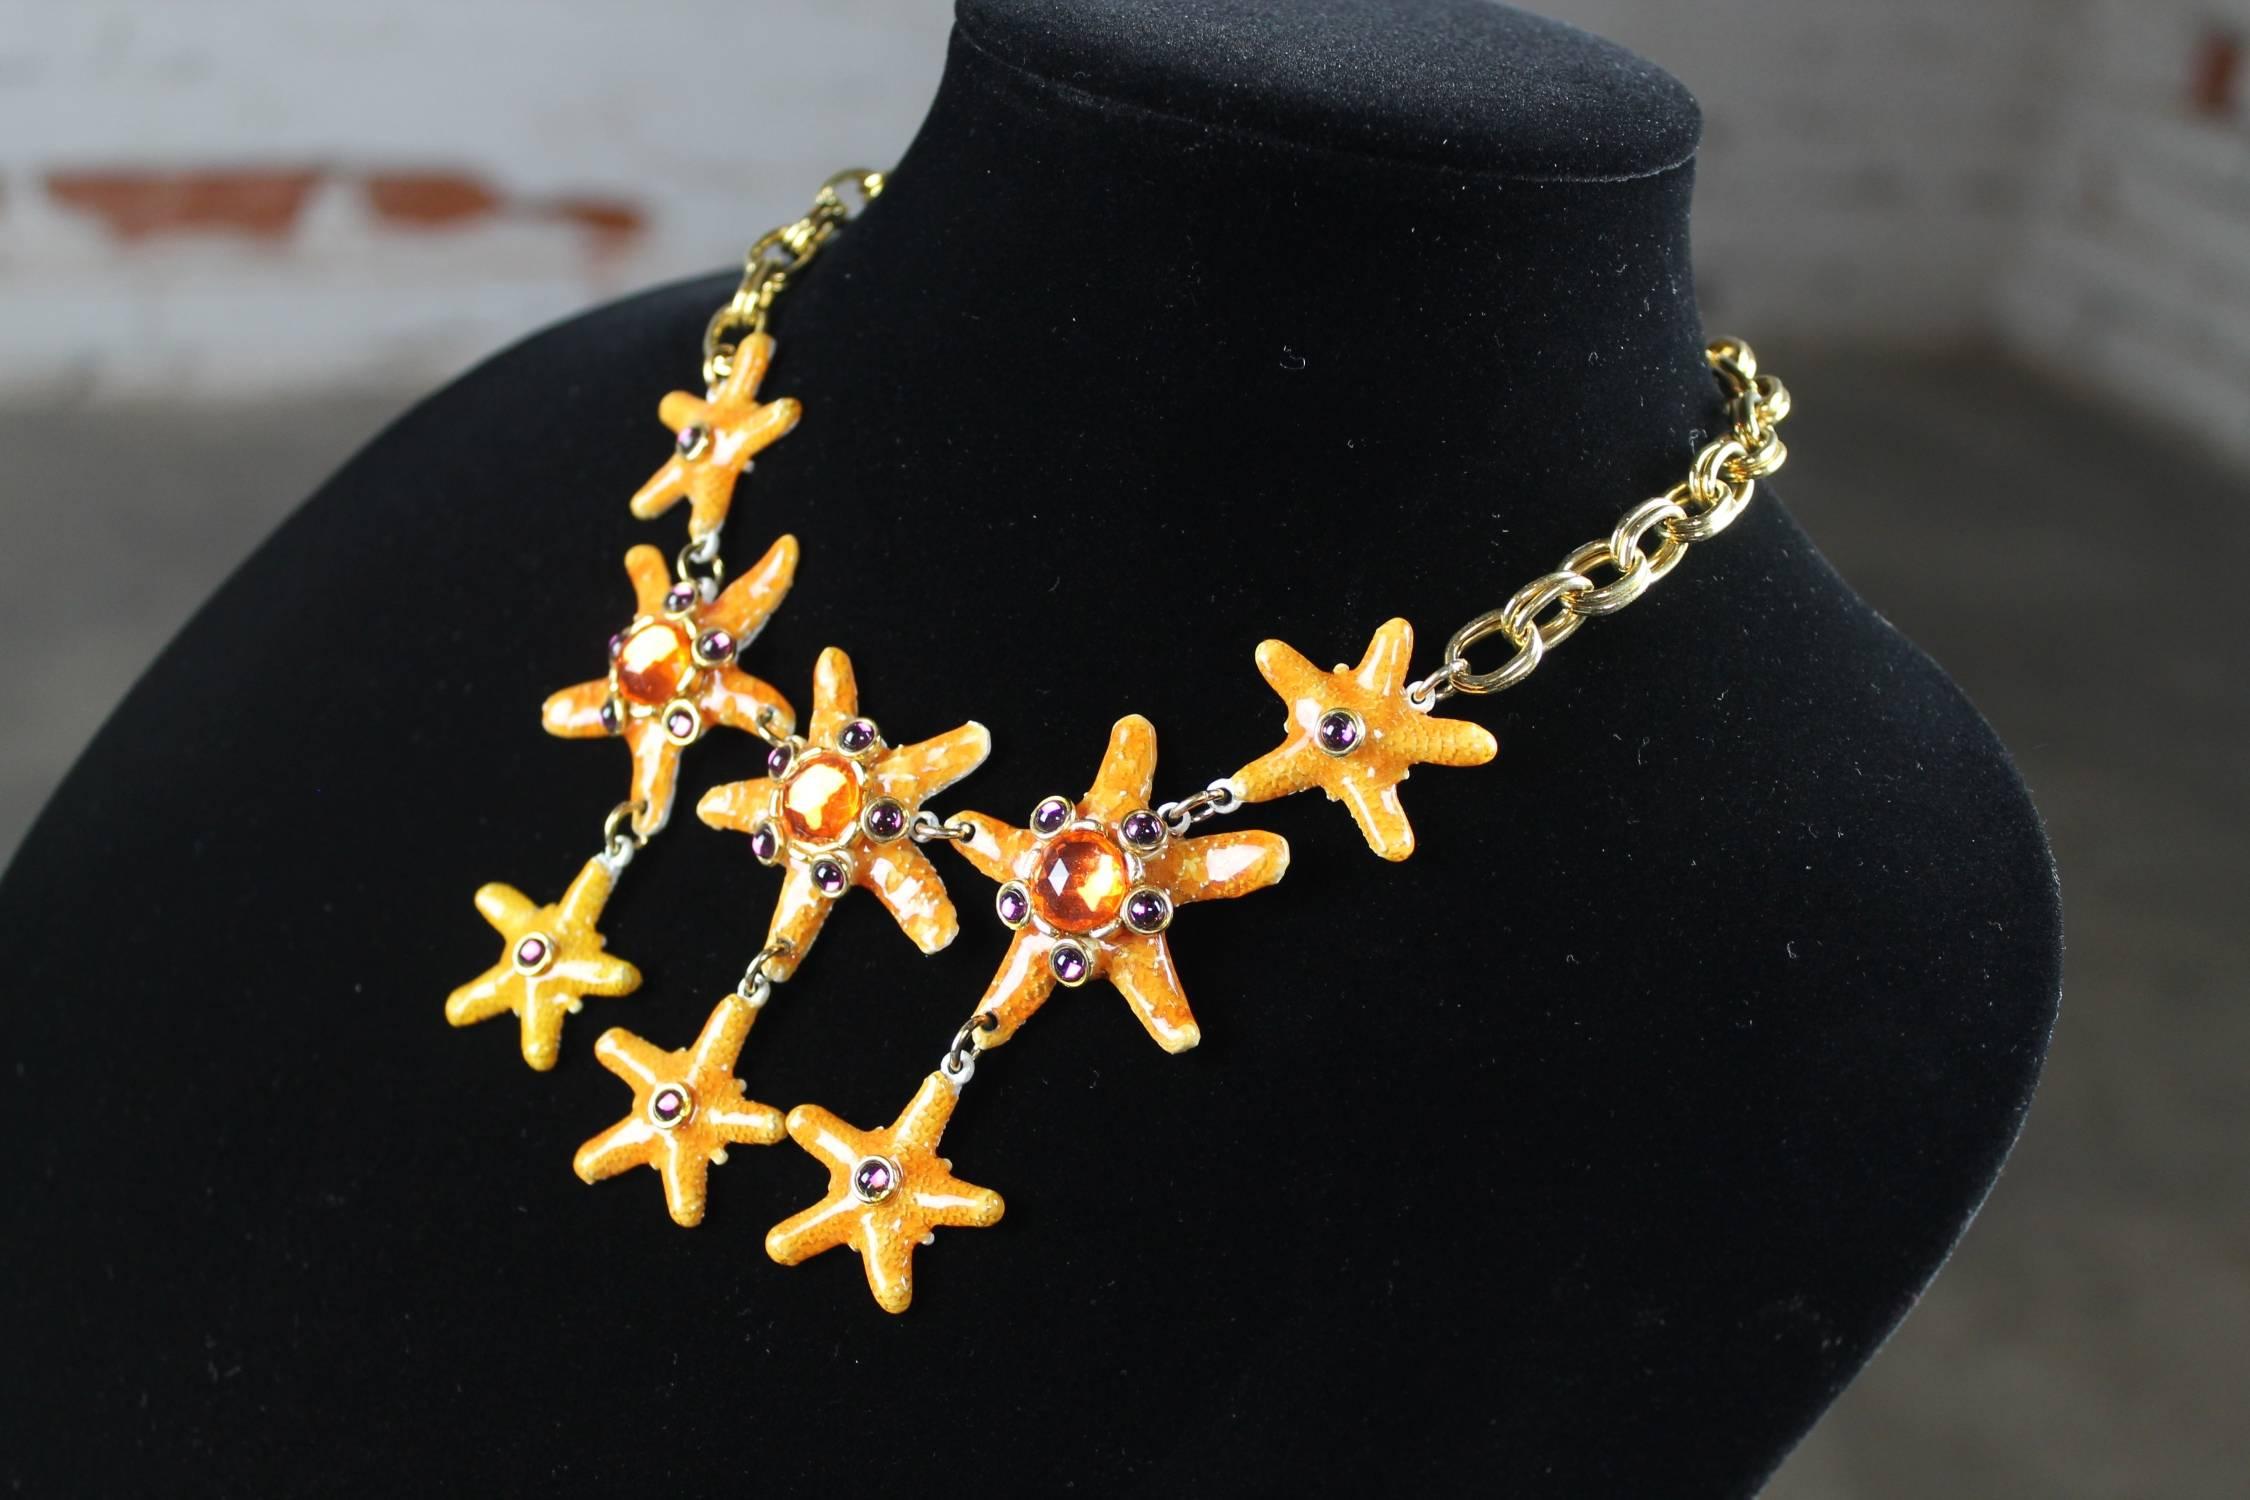 Absolutely stunning bib necklace by Gem-Craft Corp and signed Craft © consisting of eight bejeweled starfish on a chain. It is in very good vintage condition with no missing jewels.

This vintage bib style necklace consisting of eight wonderful